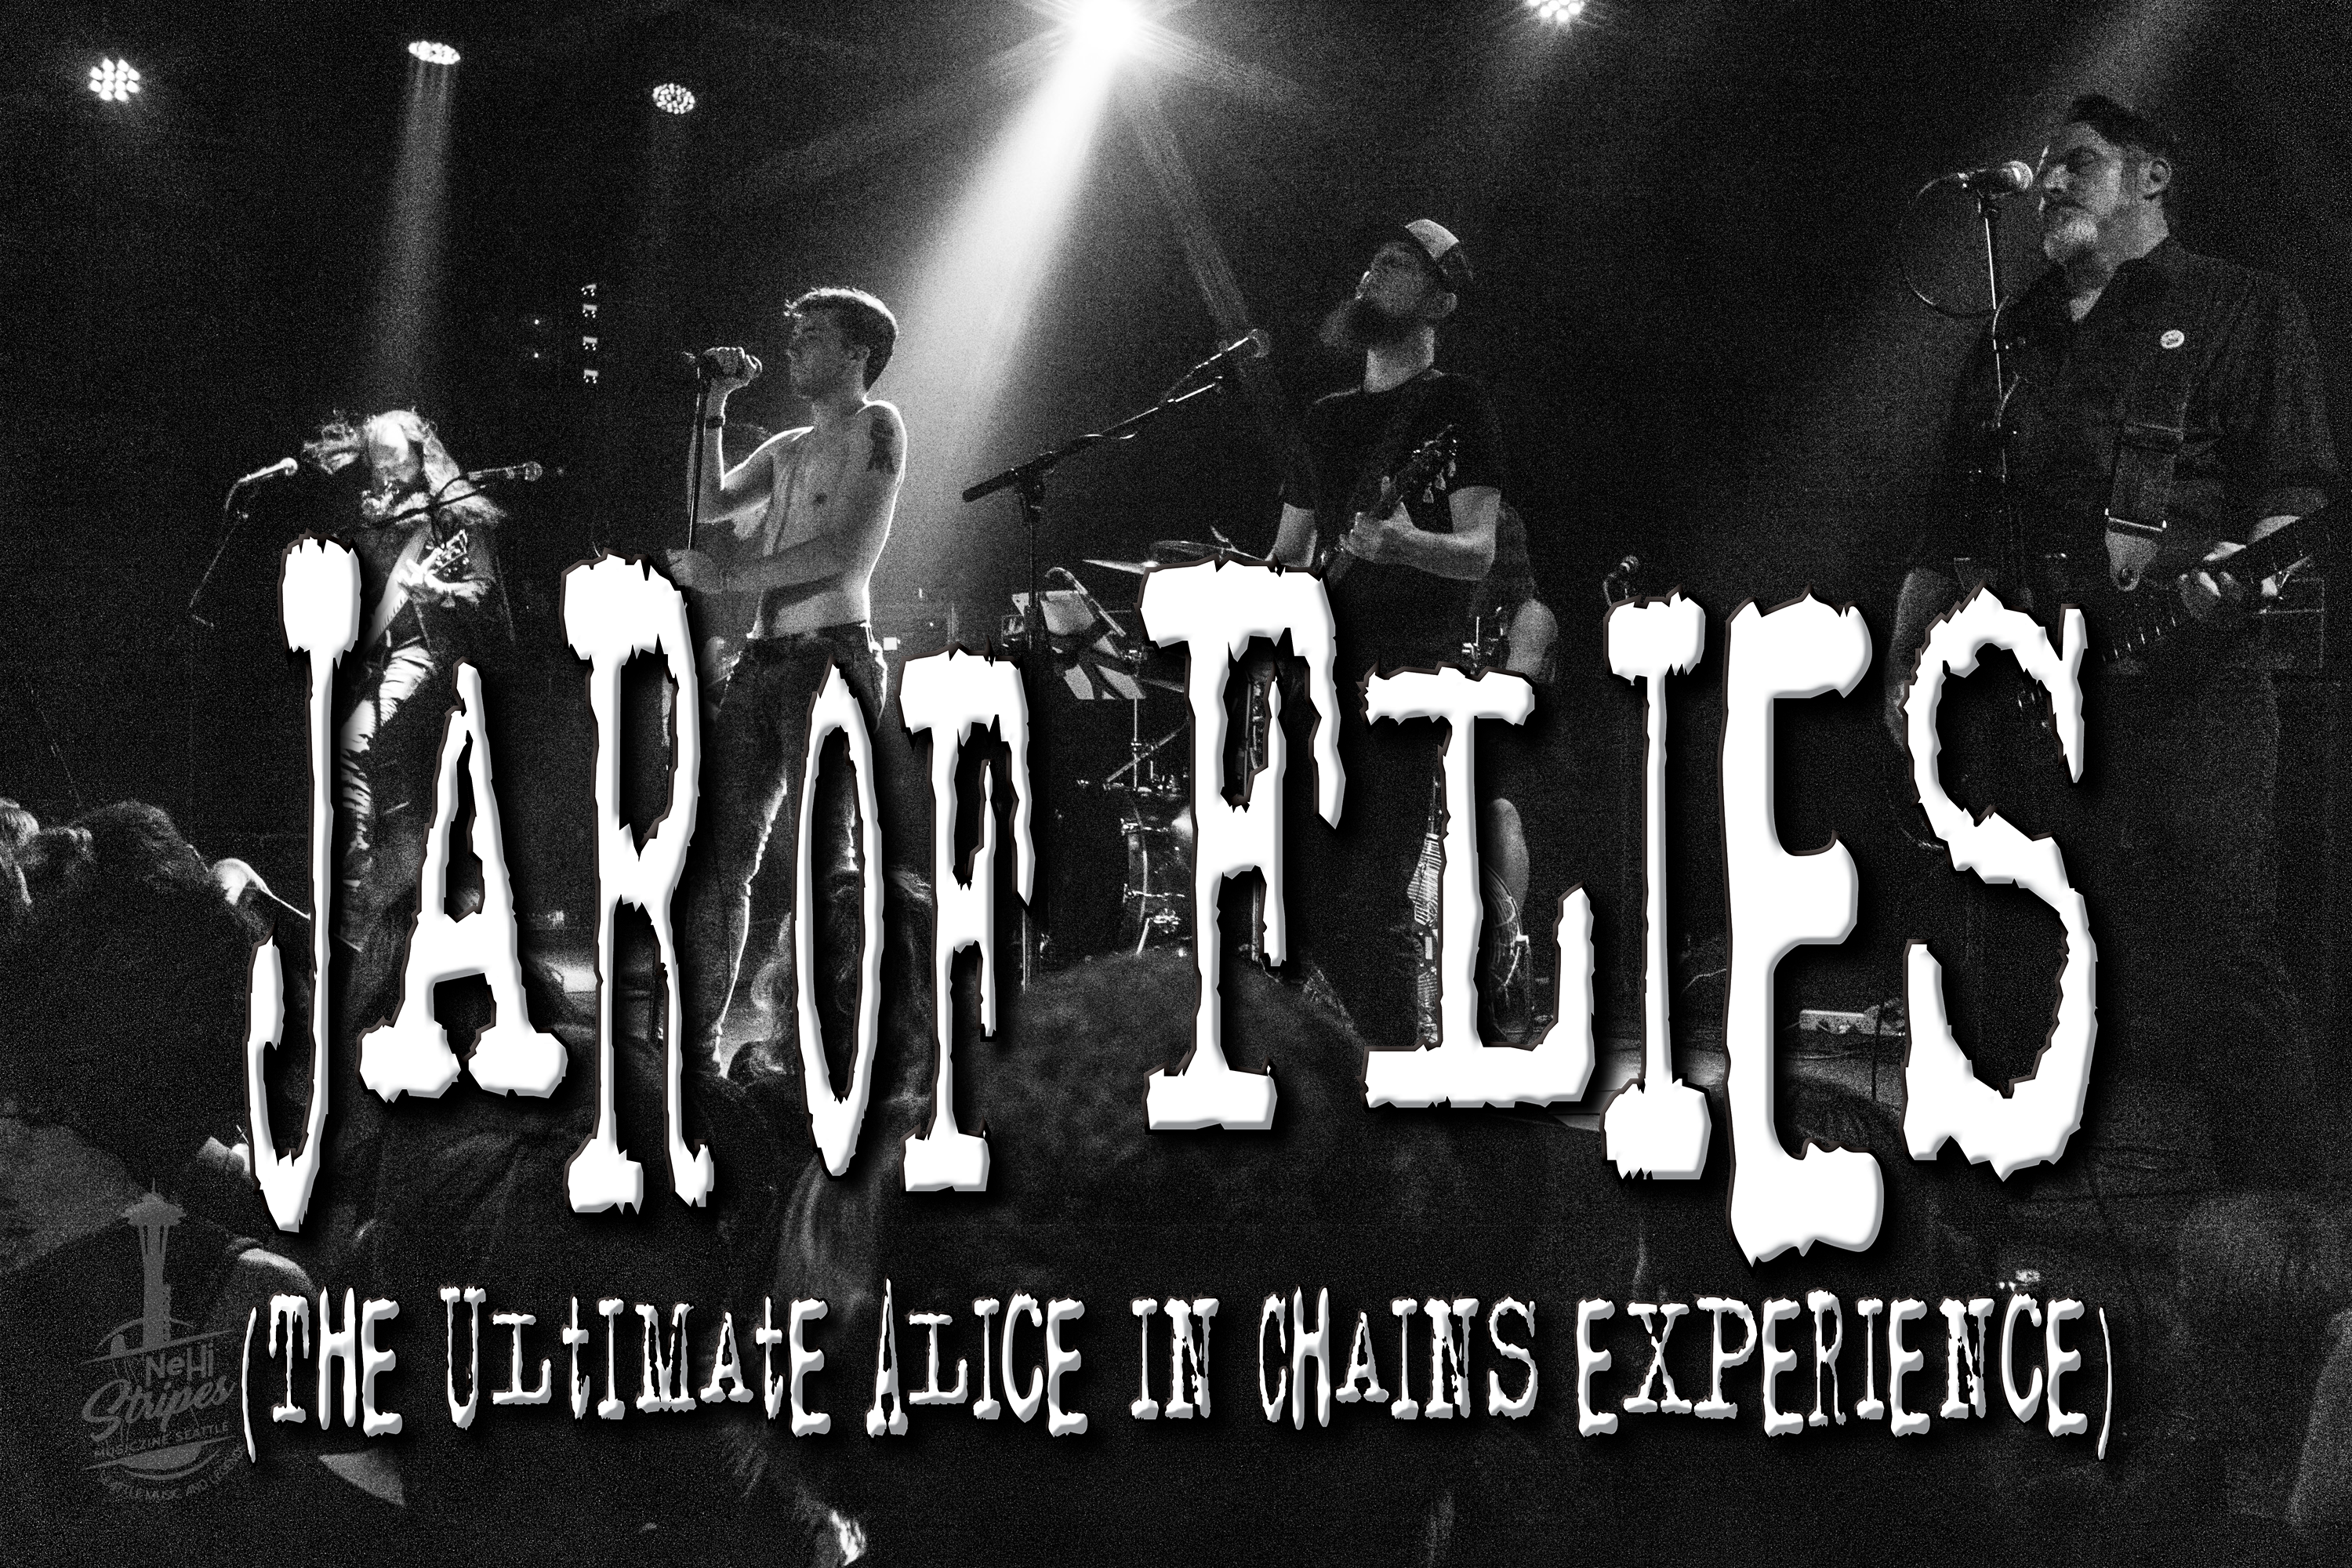 A band is performing on stage with the words fear of flies written above them.